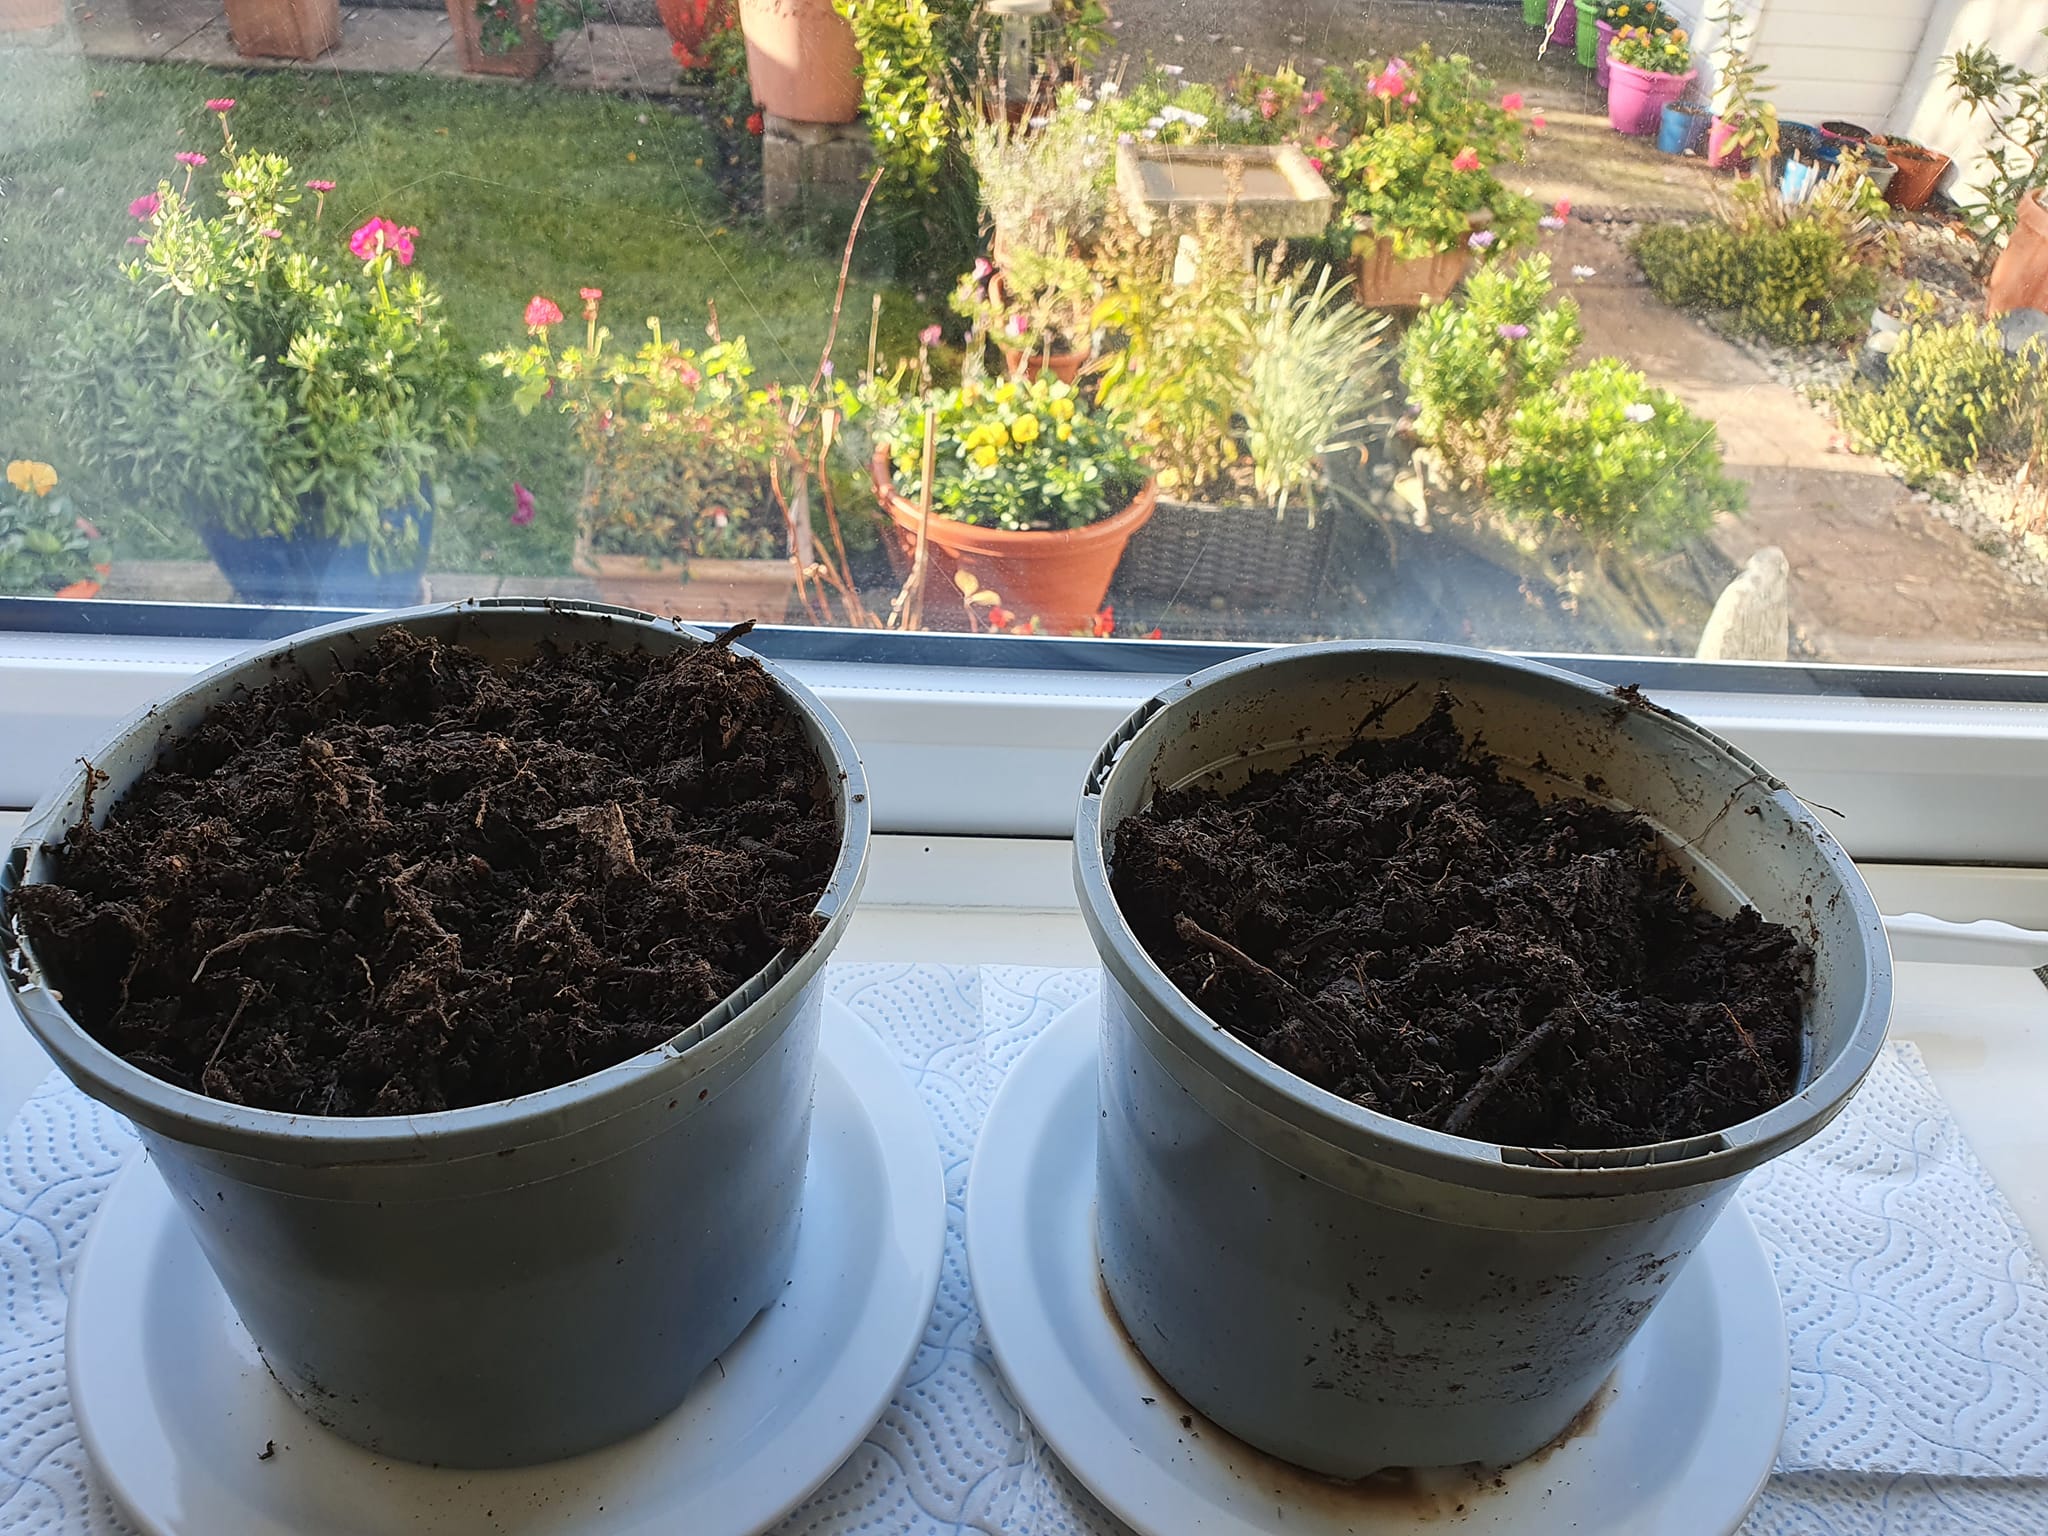 Andrew R - Basil seeds planted.17th November 21